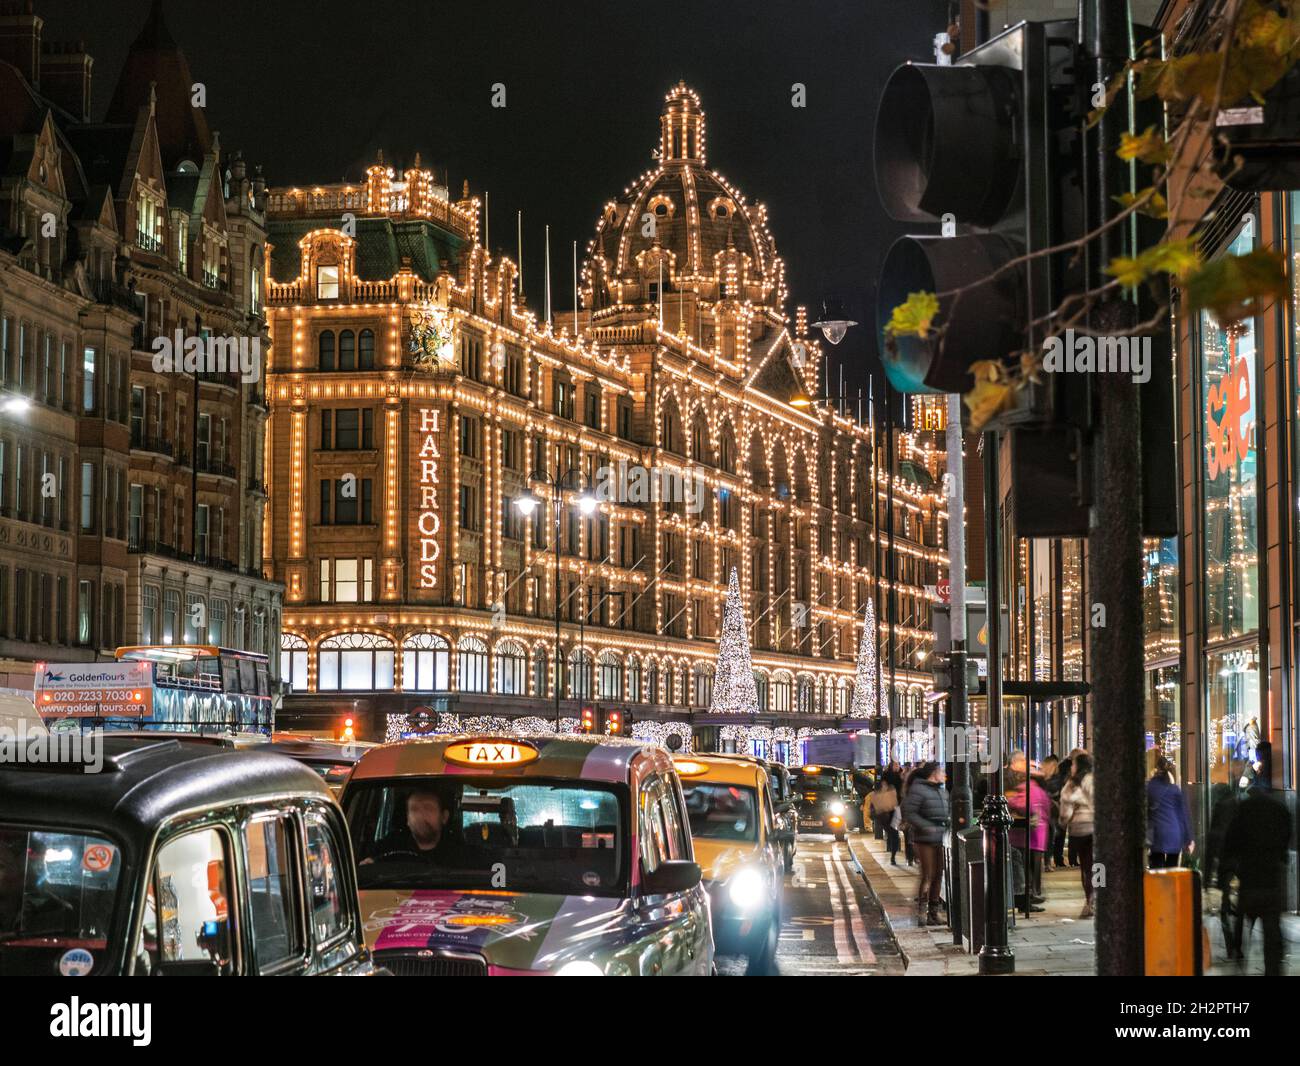 HARRODS TAXIS ULEZ LONDON NIGHT CHRISTMAS SHOPPING KNIGHTSBRIDGE Harrods department store with lights at dusk with Christmas lights shoppers and taxis for hire Knightsbridge London SW1 Stock Photo